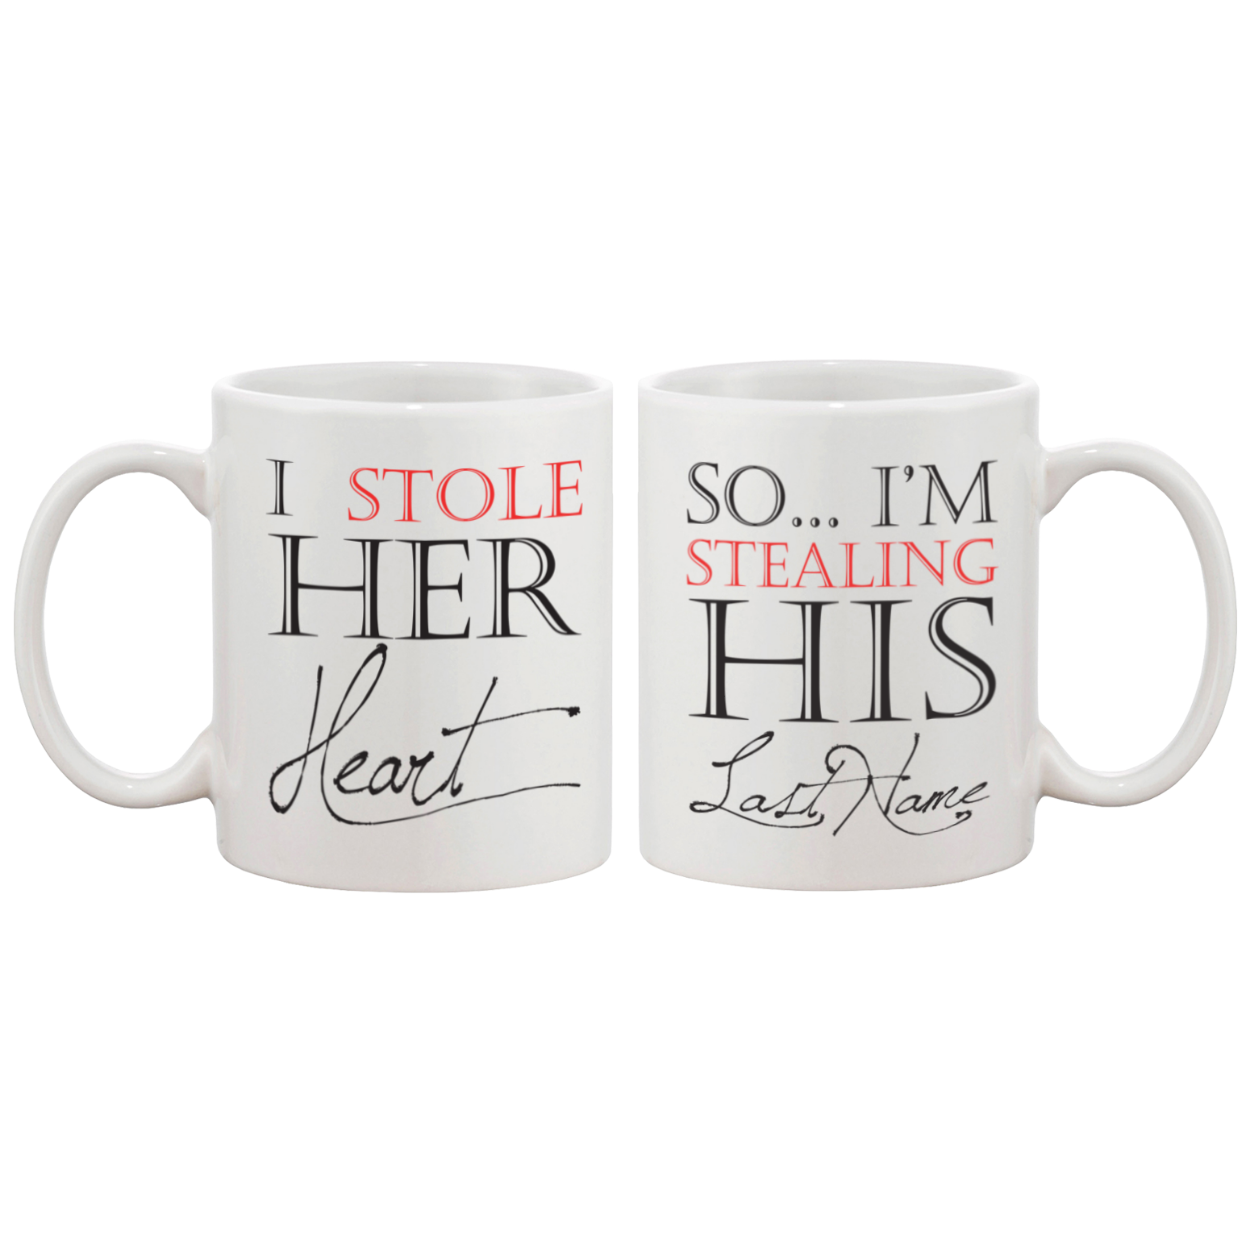 Every Beauty Needs A Beast Romantic Matching Coffee Mugs - Perfect Anniversary and Valentines Day Gift for Couples